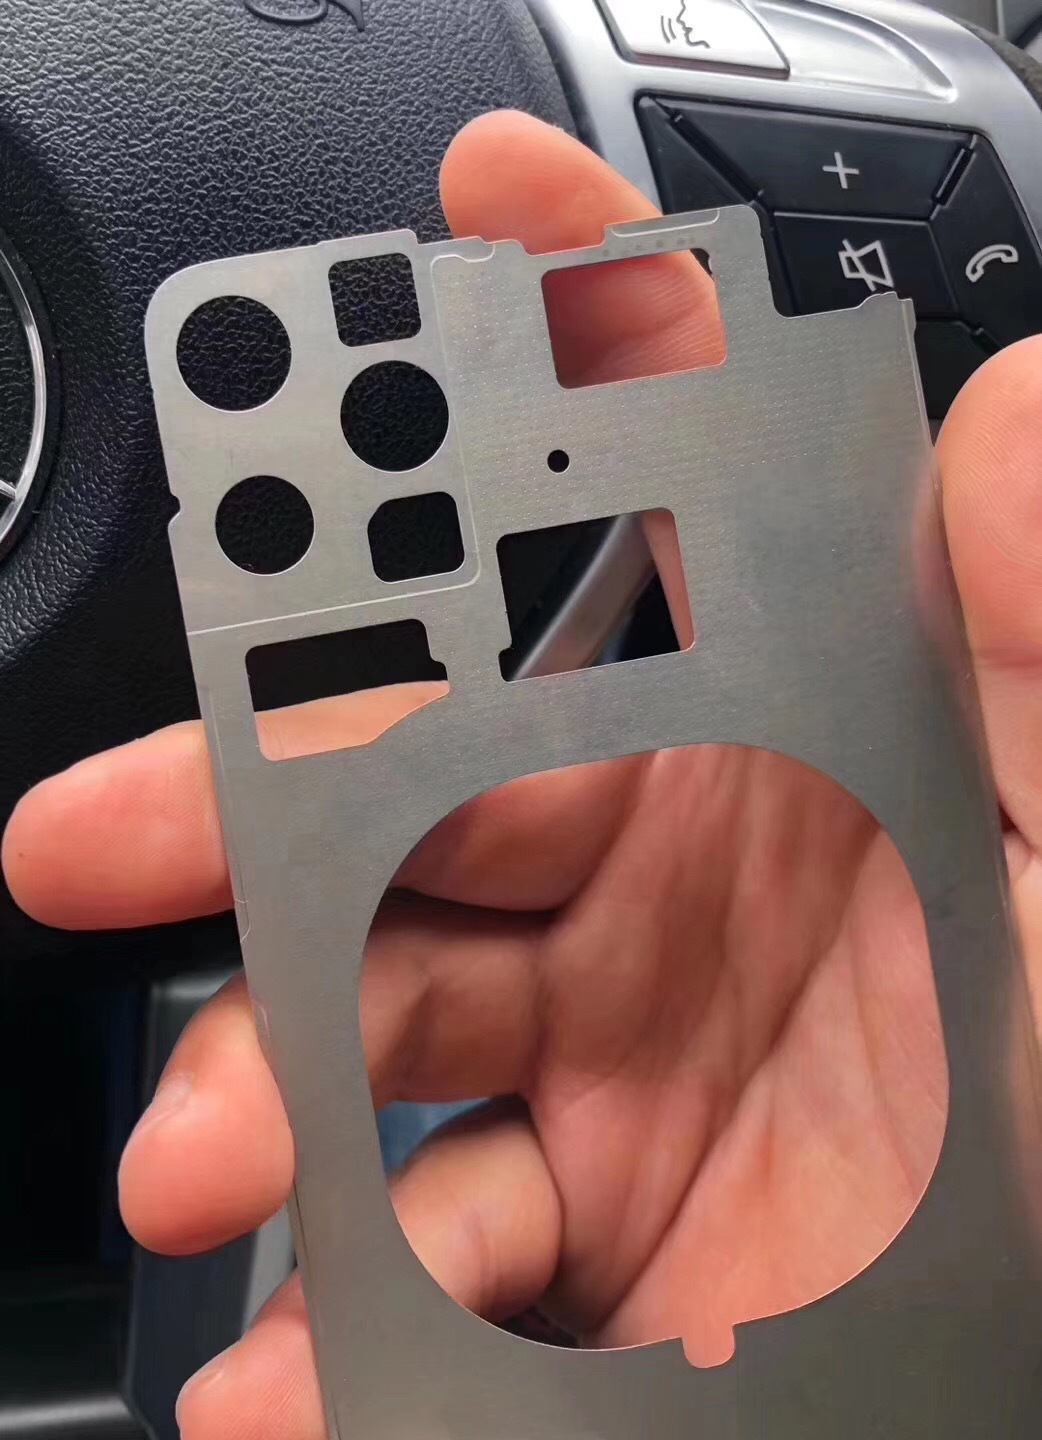 iPhone Chassis Part With Cutouts for Triple-Lens Camera Allegedly Leaked